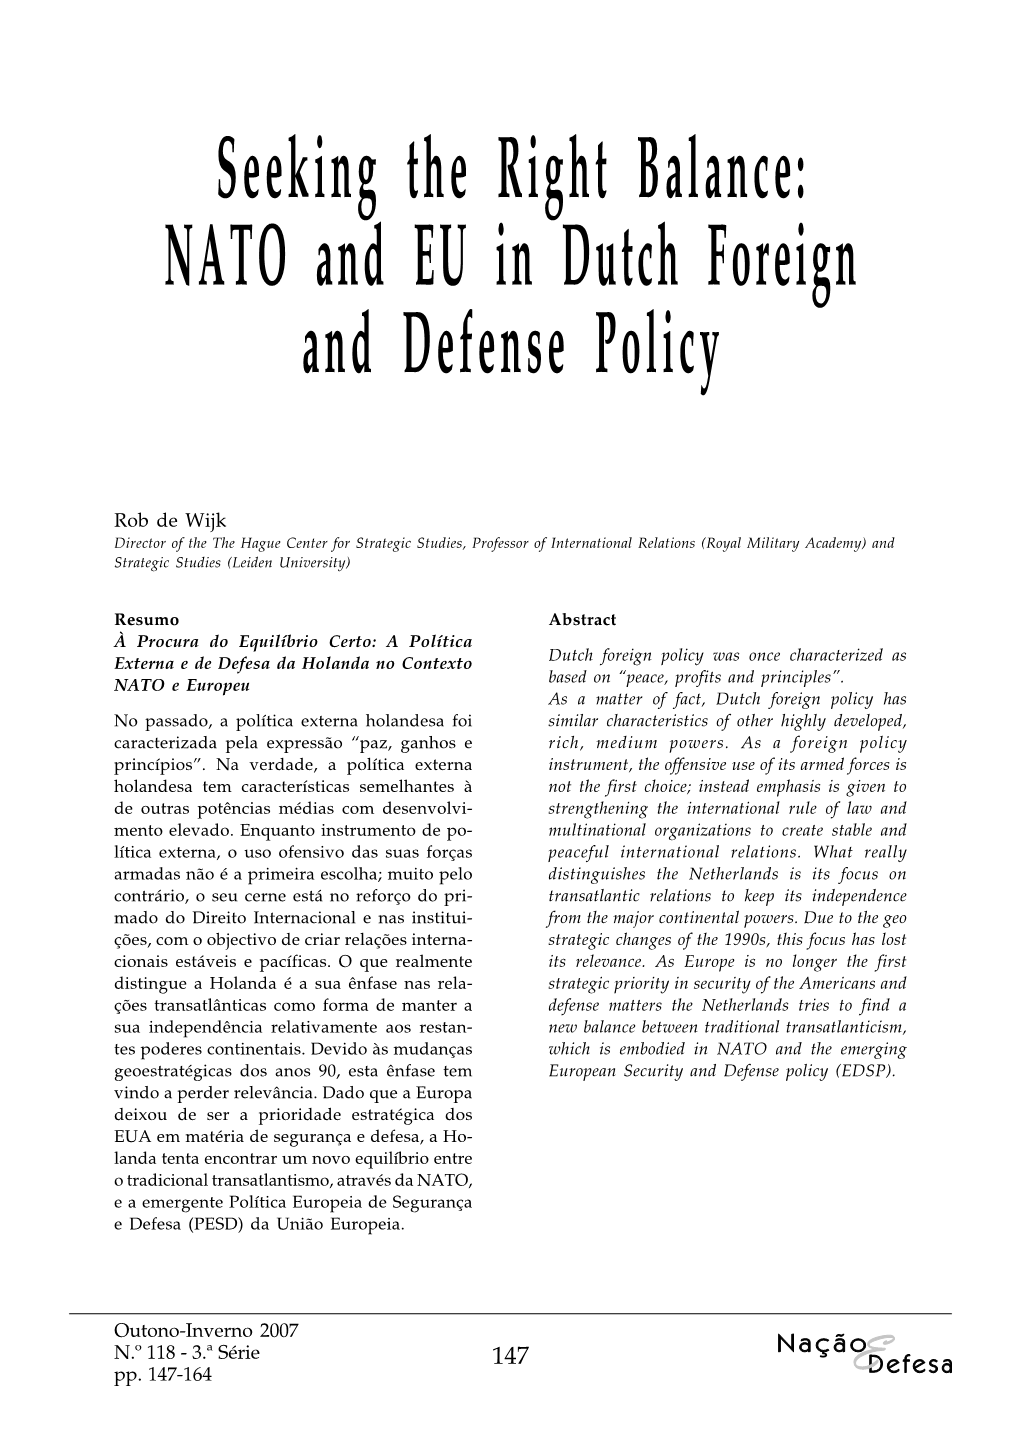 Seeking the Right Balance: NATO and EU in Dutch Foreign and Defense Policy